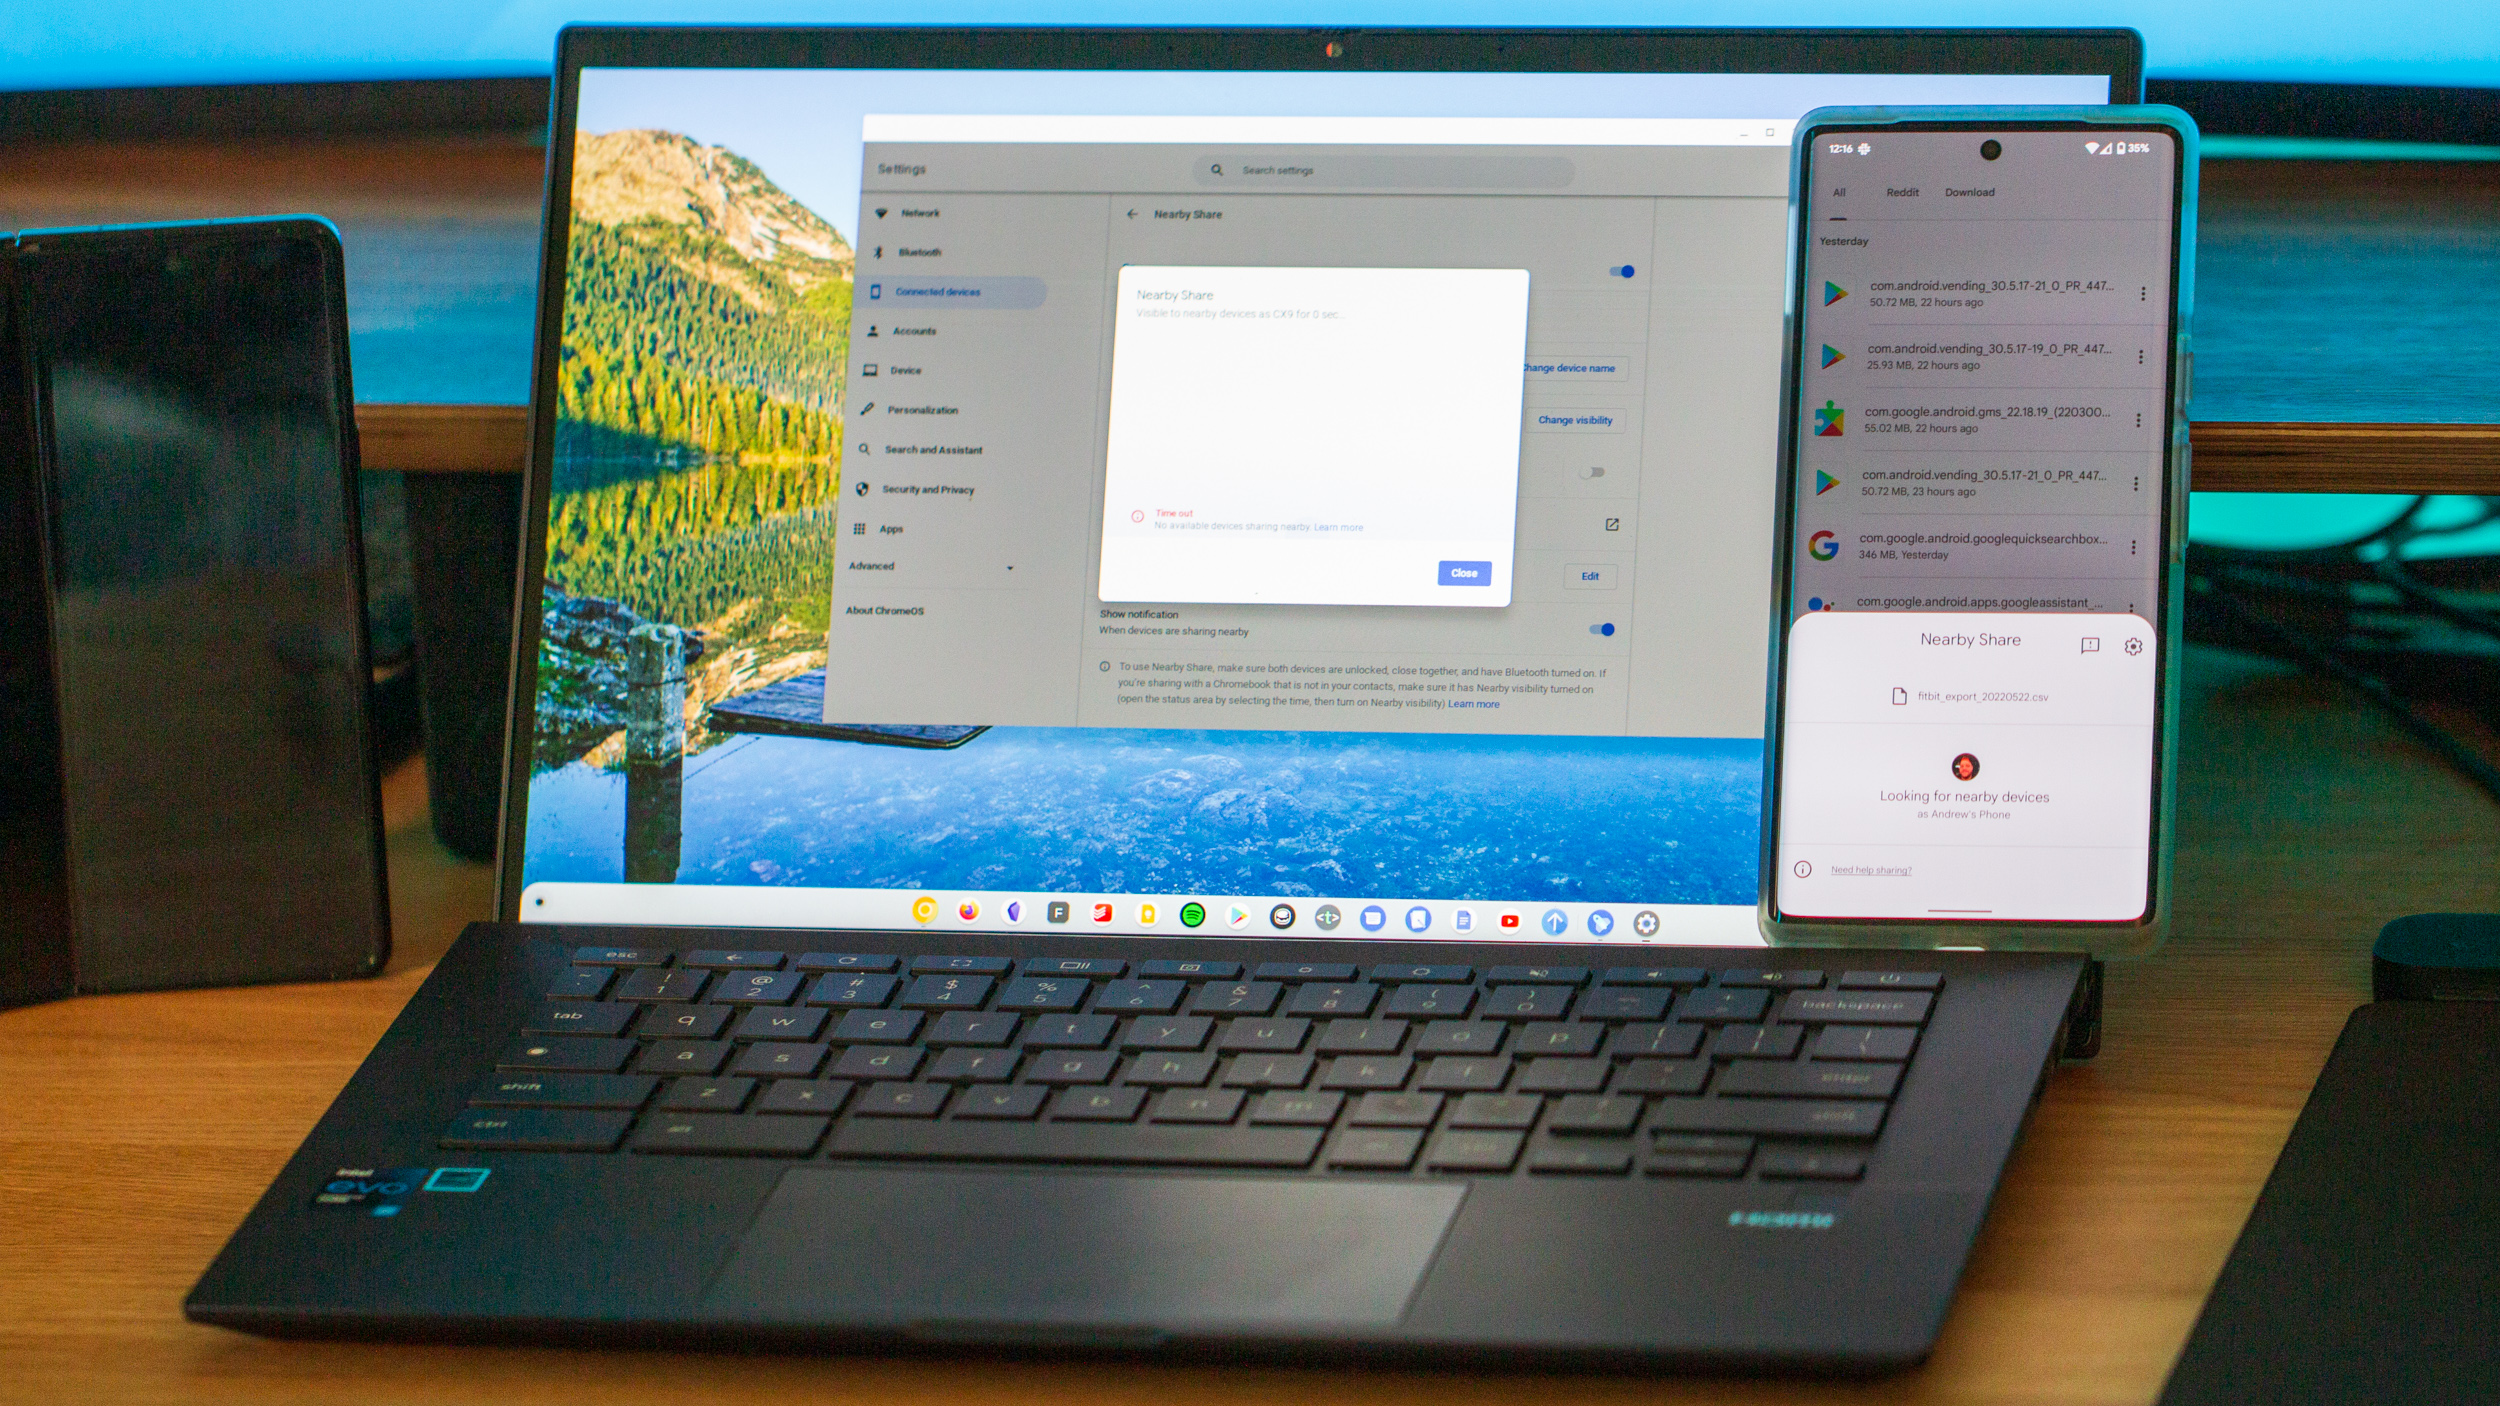 How to send files from your phone to your Chromebook using Nearby Share